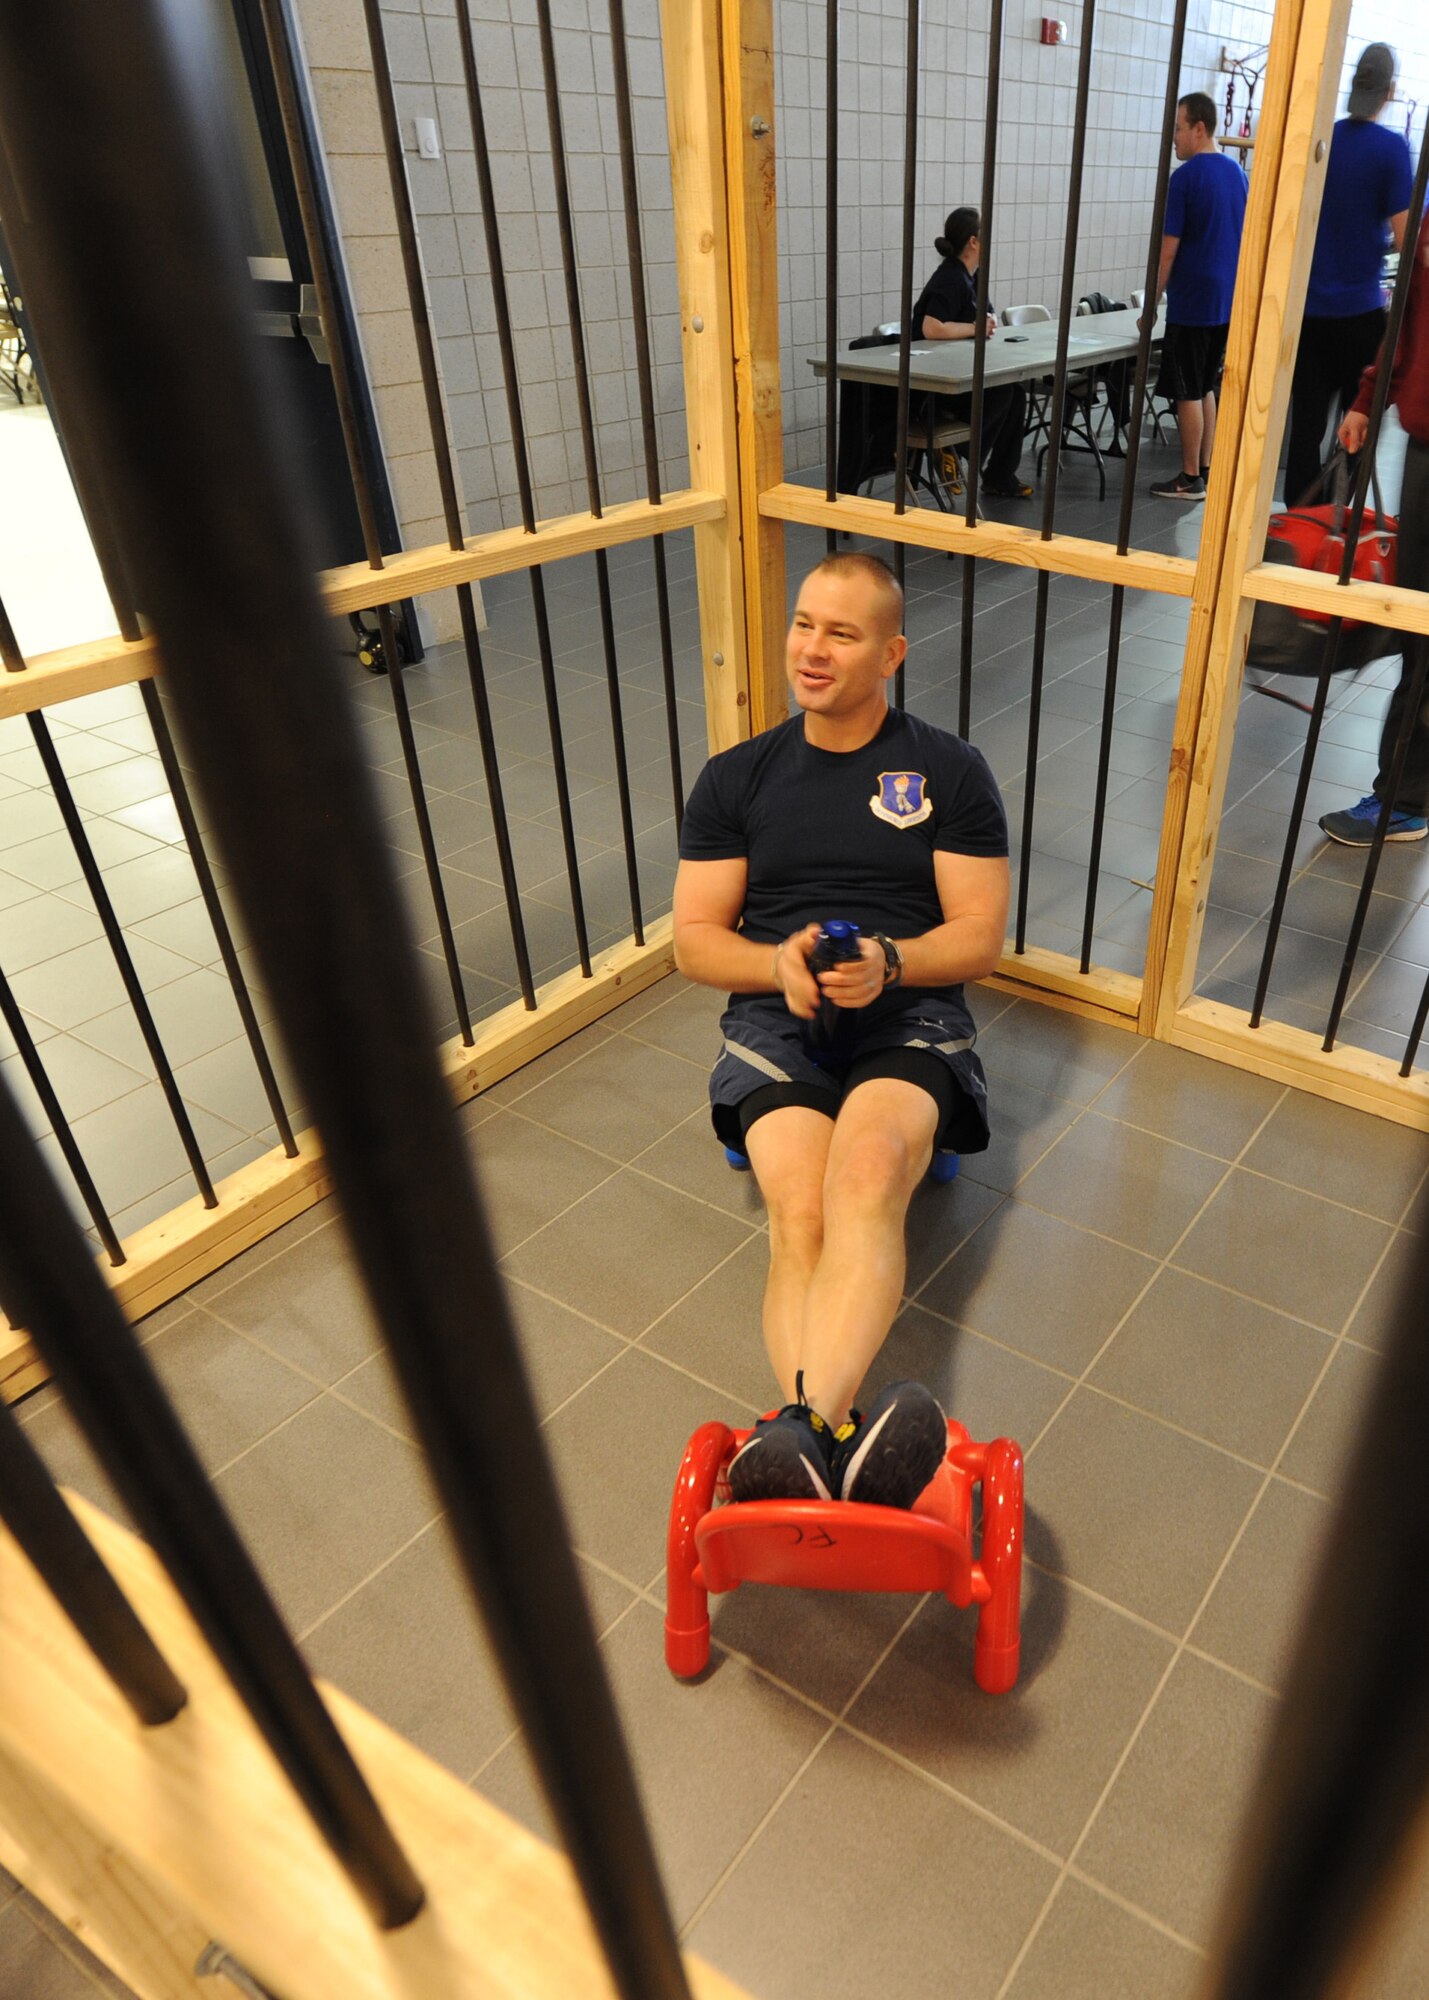 Chief Master Sgt. Todd Krulcik, 319th Air Base Wing command chief, relaxes in jail during the 2016 Winter Bash March 18, 2016, on Grand Forks Air Force Base, N.D. The 319th Security Forces Squadron morale club allowed Airmen to pay to have their friends imprisoned in the Jail-N-Bail to raise money for future events. (U.S. Air Force photo by Airman 1st Class Ryan Sparks/Released)